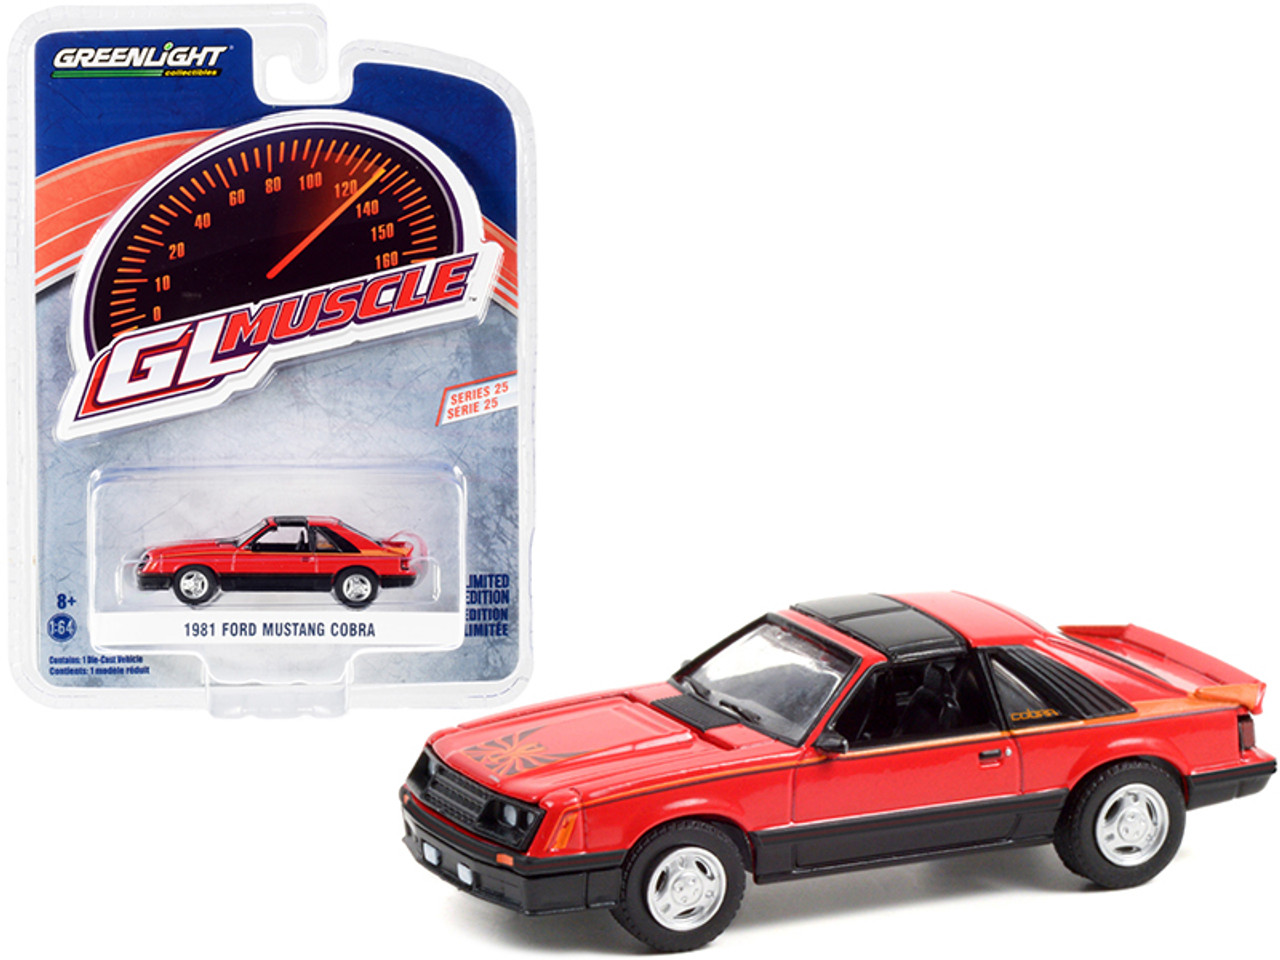 1981 Ford Mustang Cobra Bright Red with Graphics "Greenlight Muscle" Series 25 1/64 Diecast Model Car by Greenlight